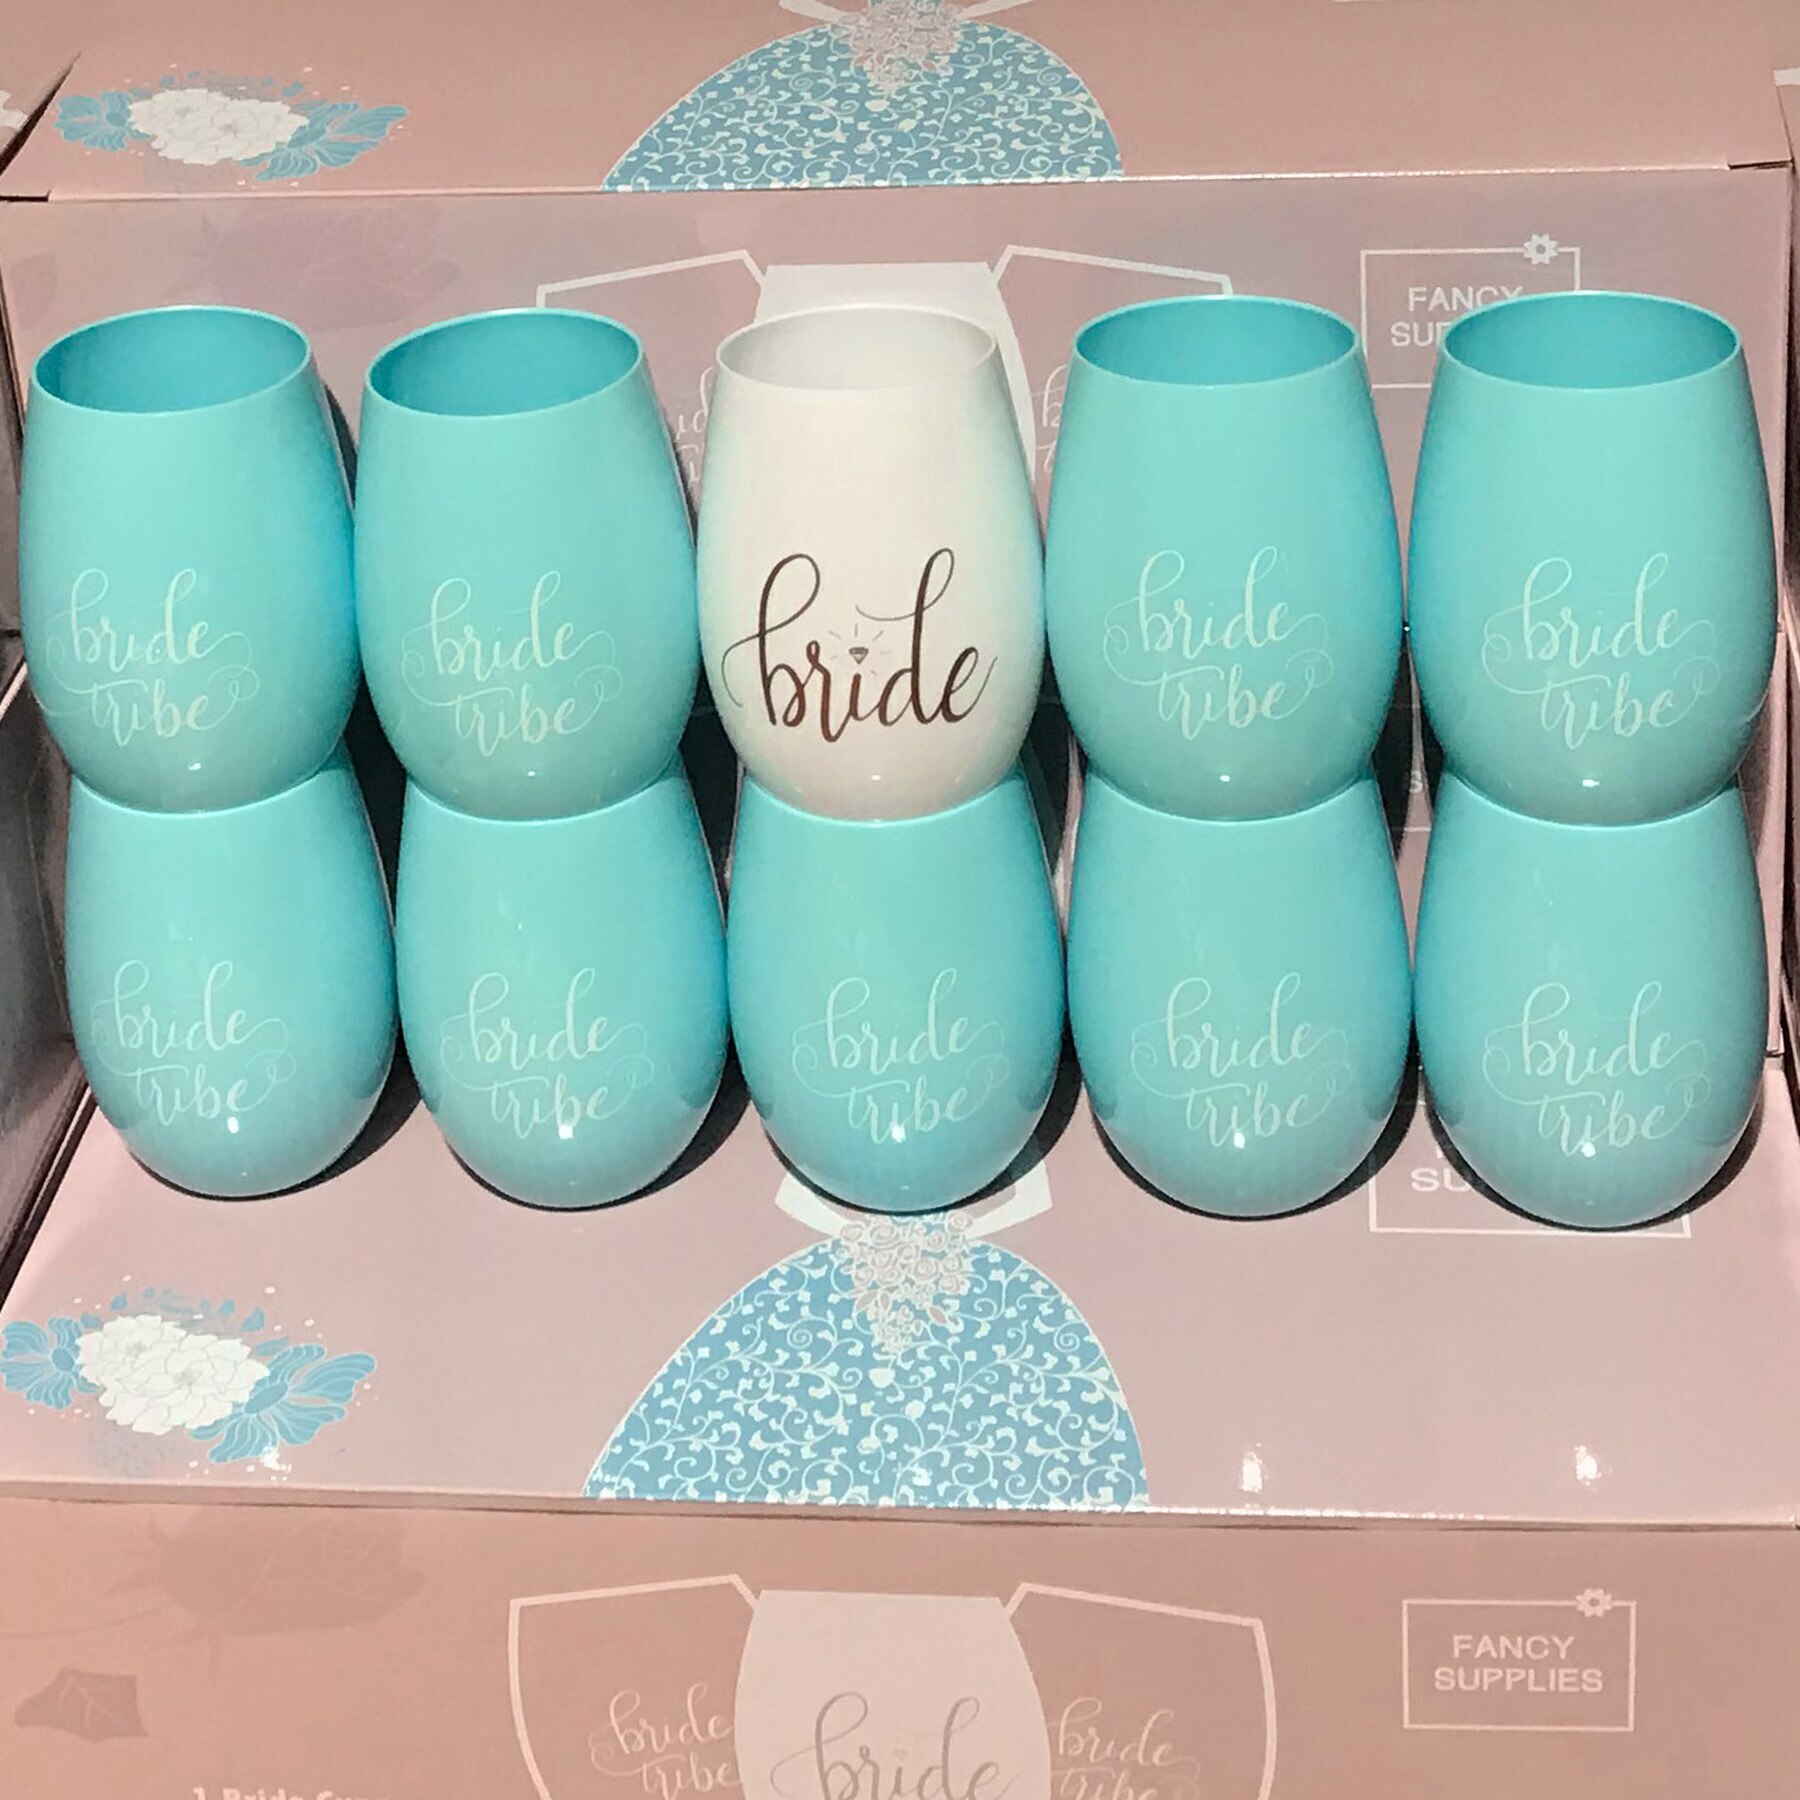 https://cdn11.bigcommerce.com/s-93kae/images/stencil/original/products/236/1443/bride-cups-blue-tribe-10-white-front__41325.1563392169__36931.1615152658.jpg?c=2